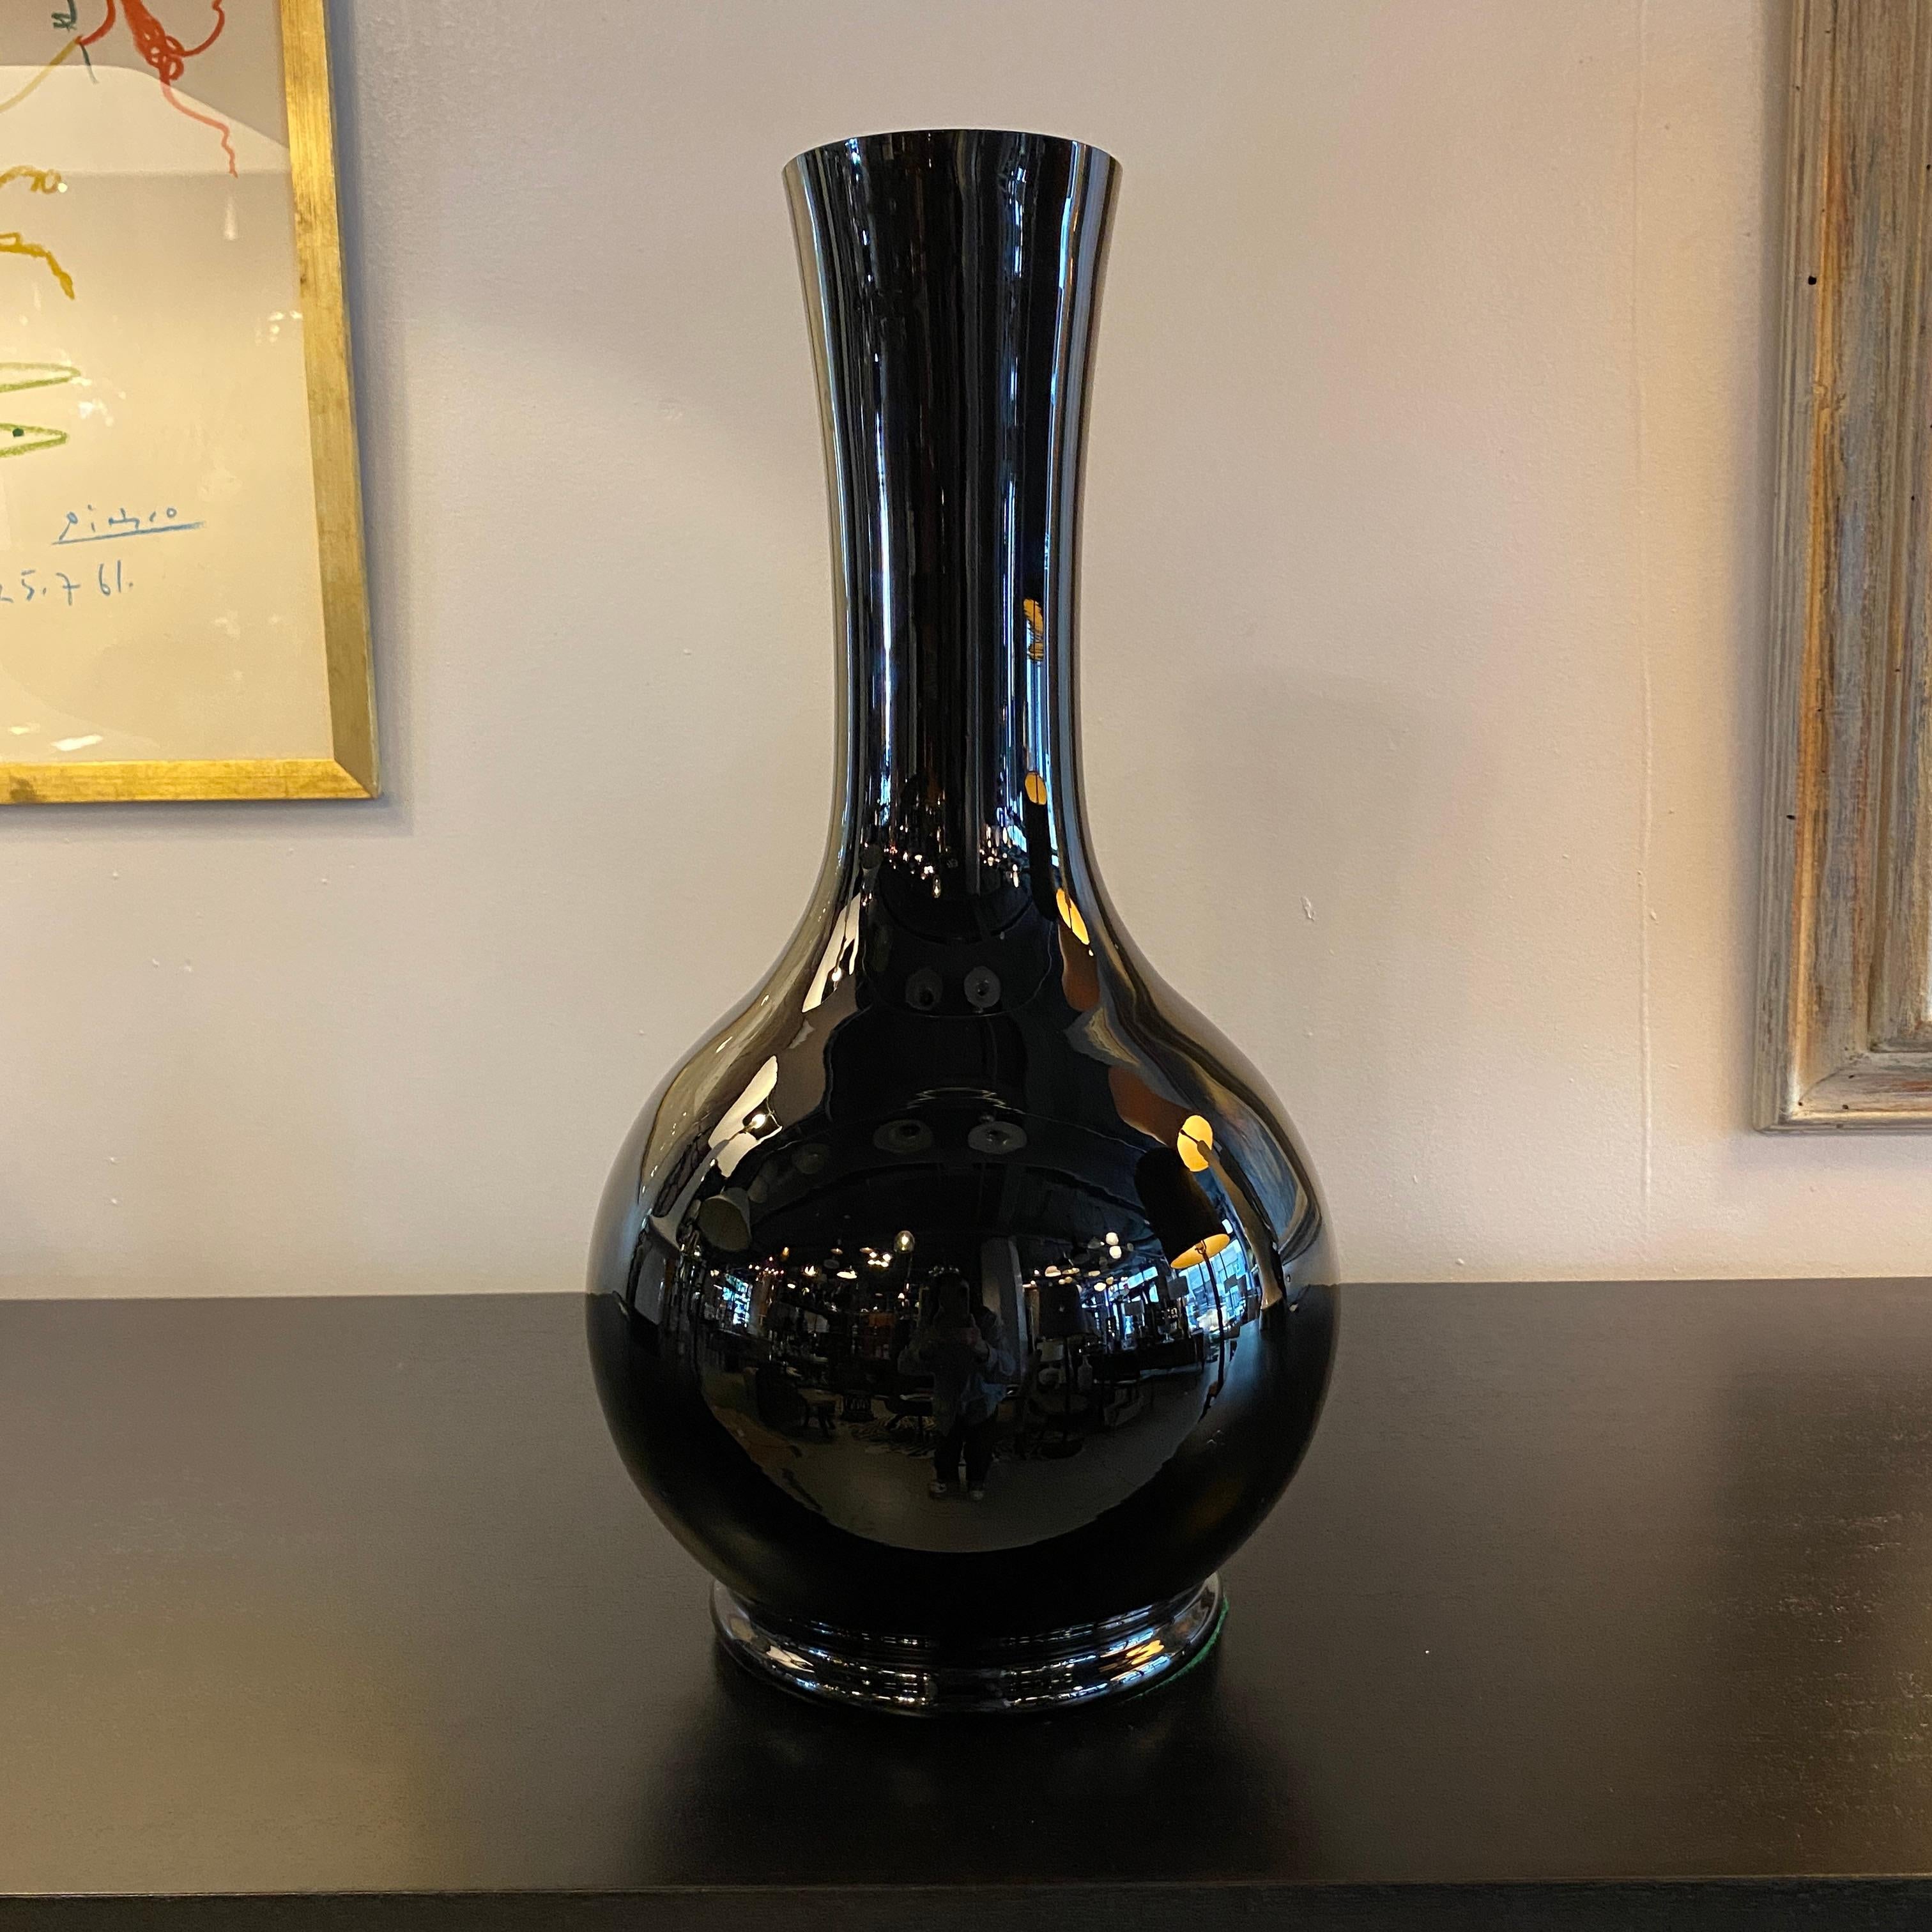 Tall, chic, mid-century, opaque ebony art glass vase with spherical base and long tapered neck. The black glass is highly reflective and glossy. It's classic shape and impressive height make this ebony art glass vase the perfect vessel for dramatic,